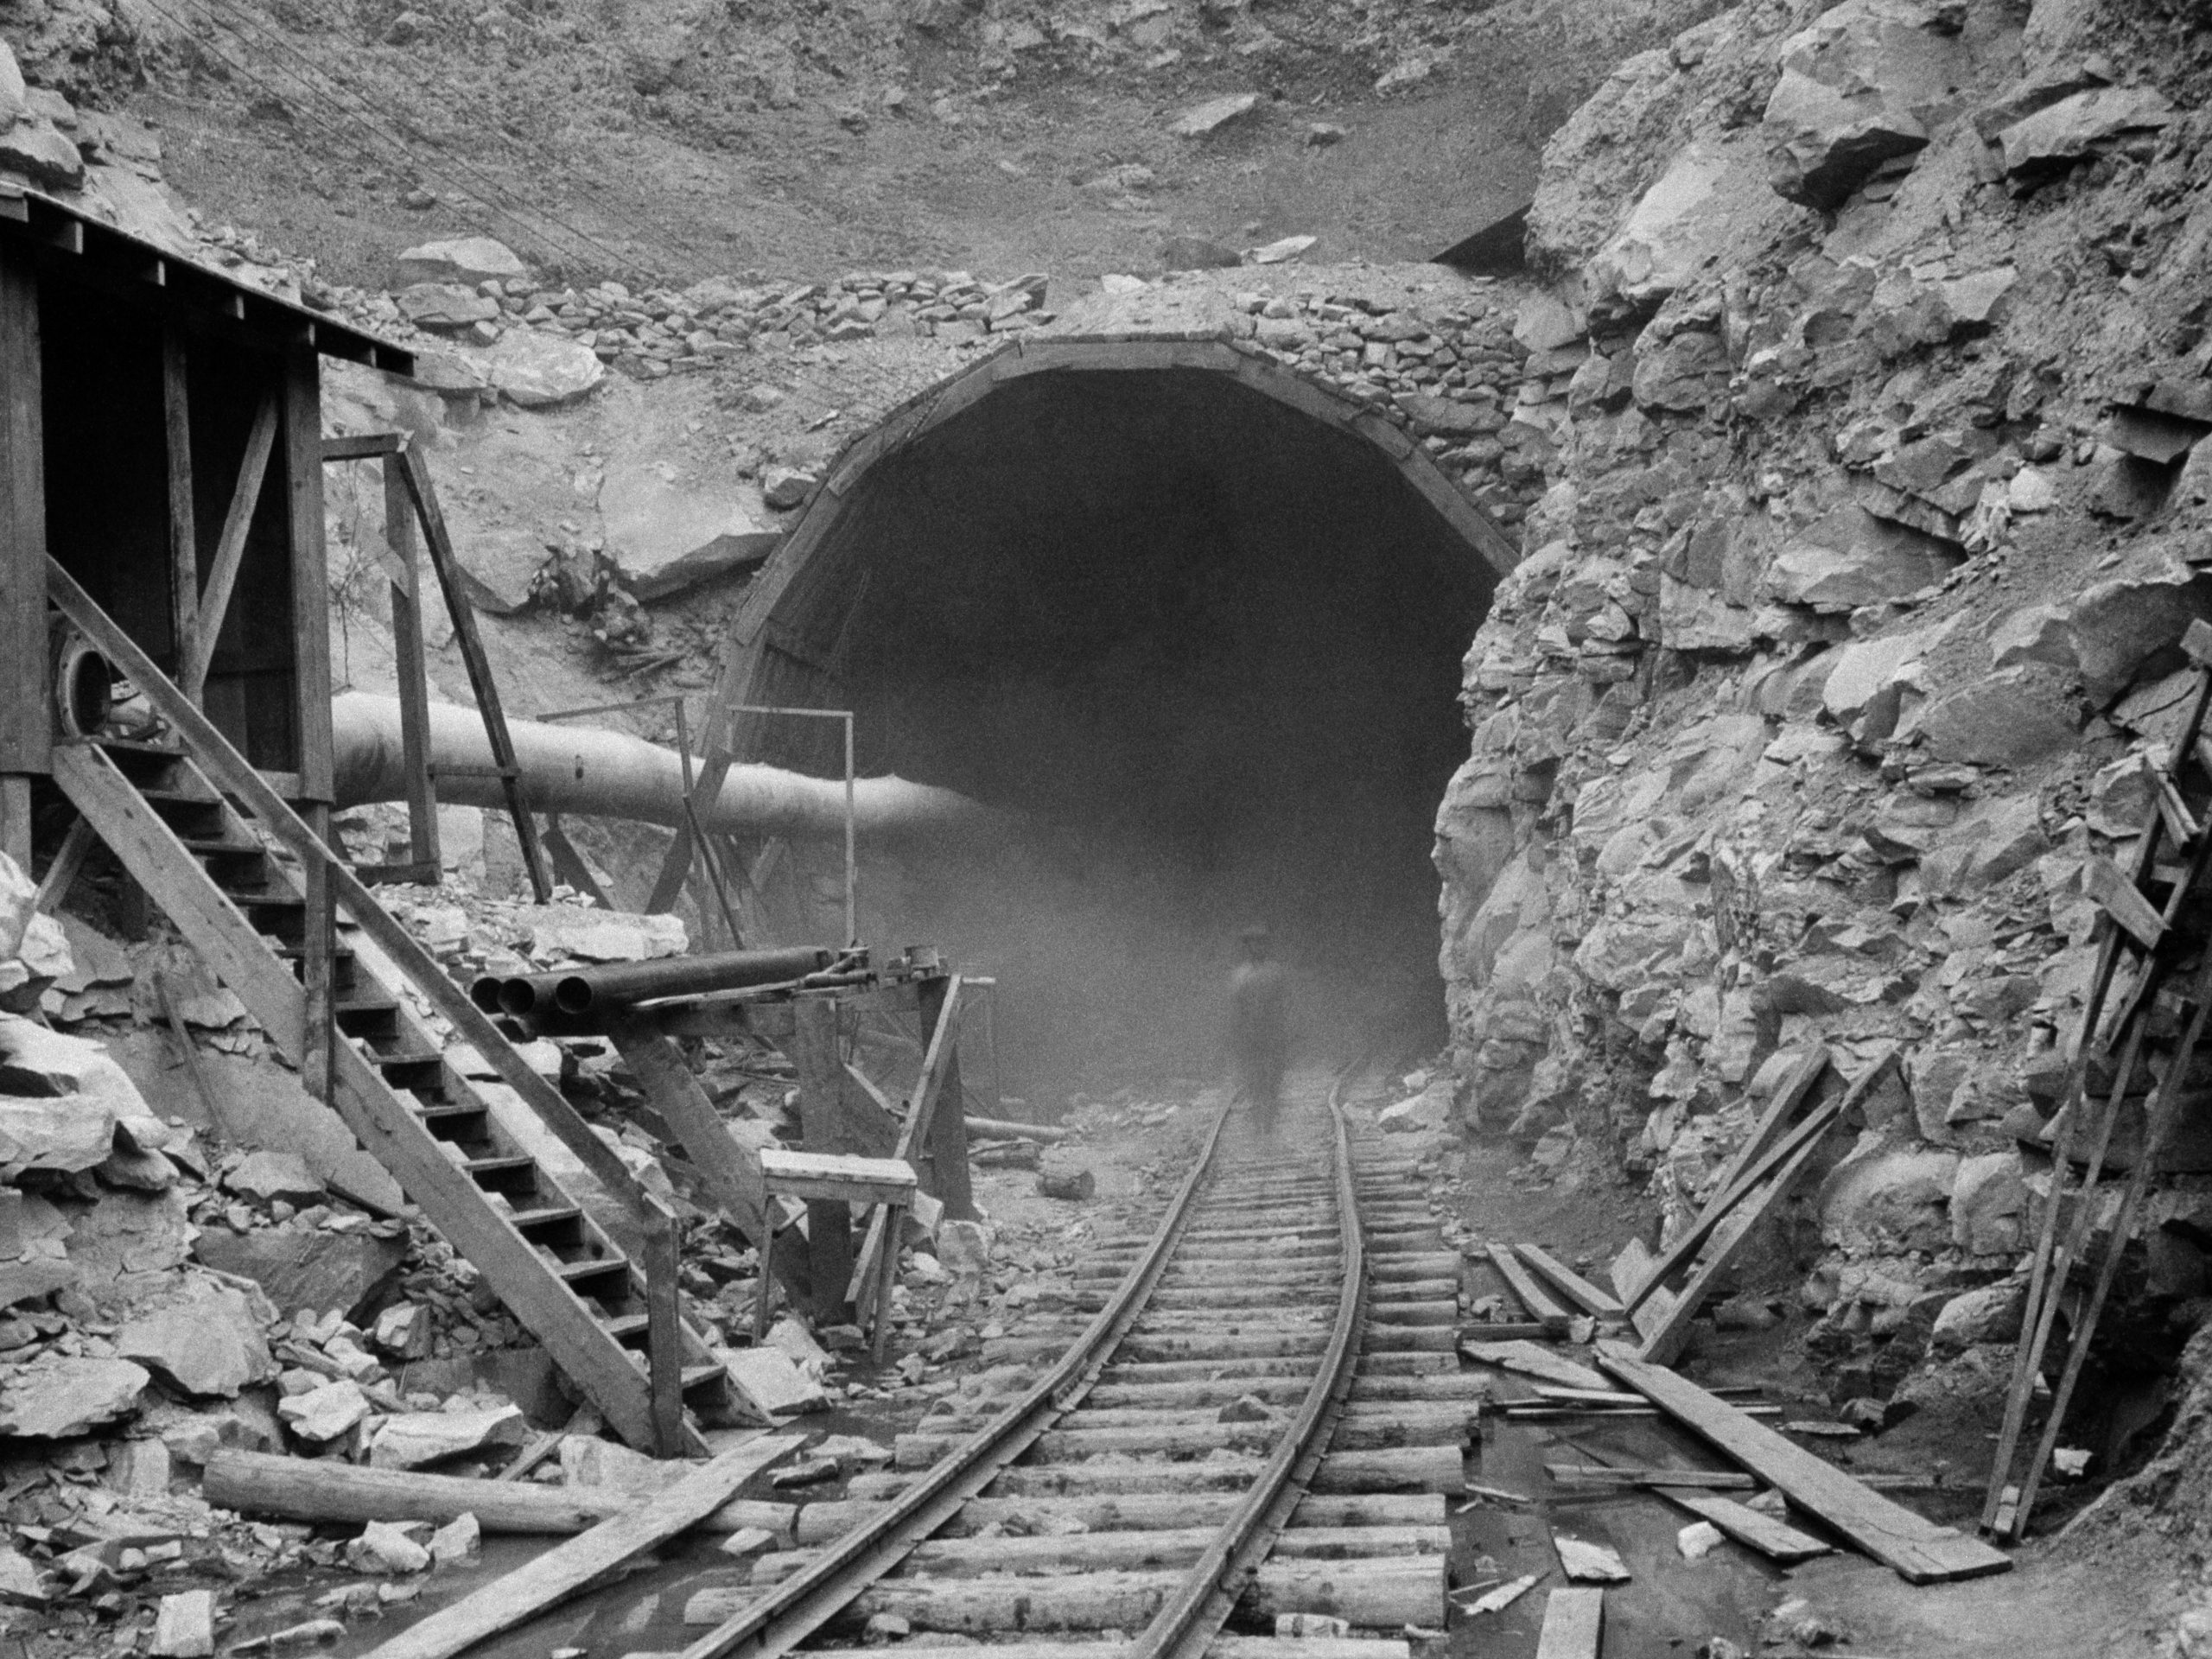 Dust circles a worker during the construction of the Hawks Nest Tunnel in 1930. Workers on the project were exposed to toxic levels of silica dust; hundreds ultimately died.